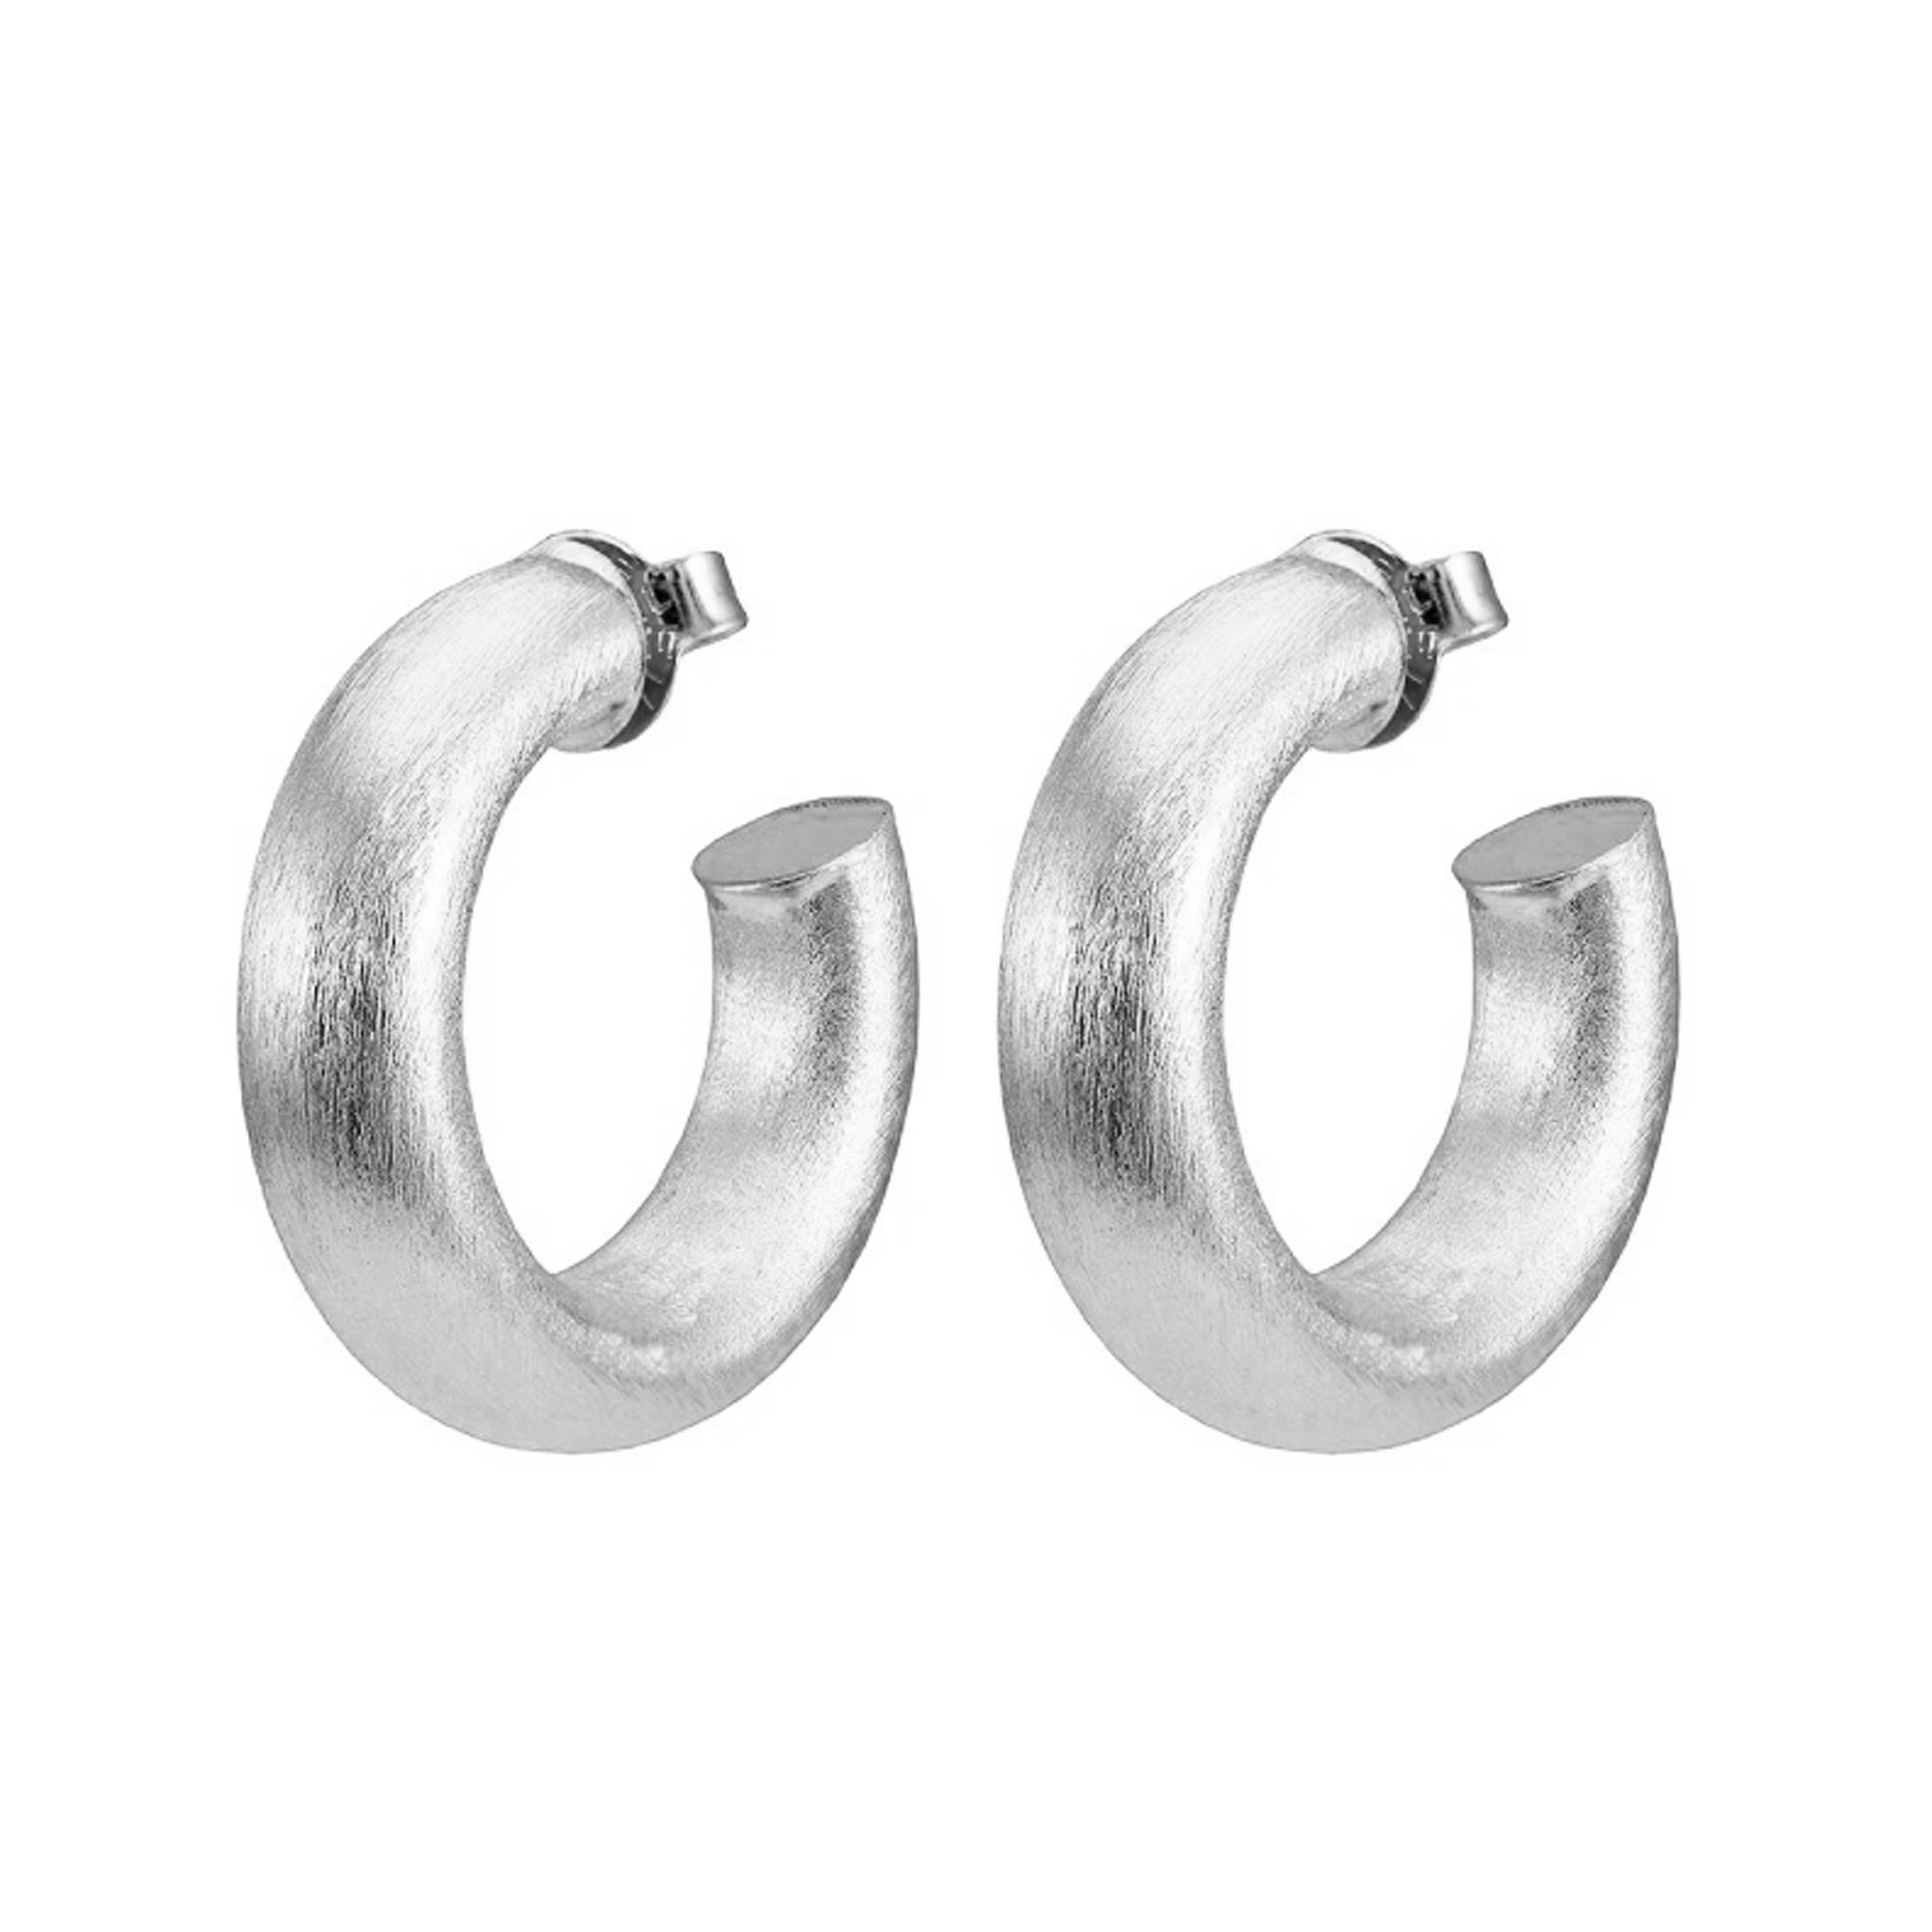 Sheila Fajl Thick Small Chantal Hoop Earrings in Brushed Silver Plated